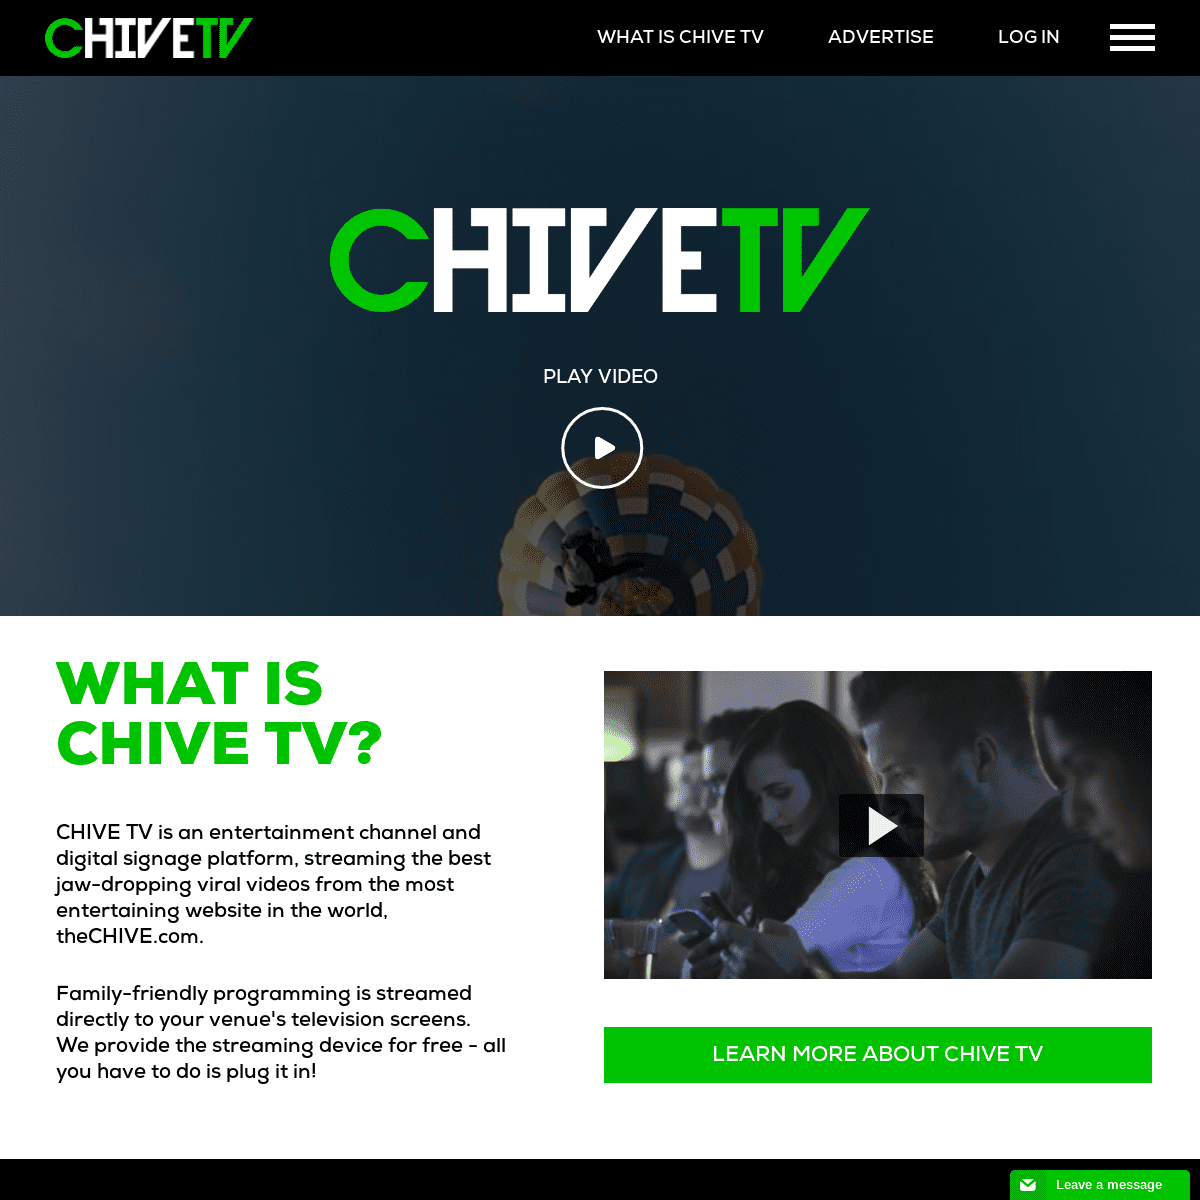 CHIVE TV - The World's Best Bar Entertainment